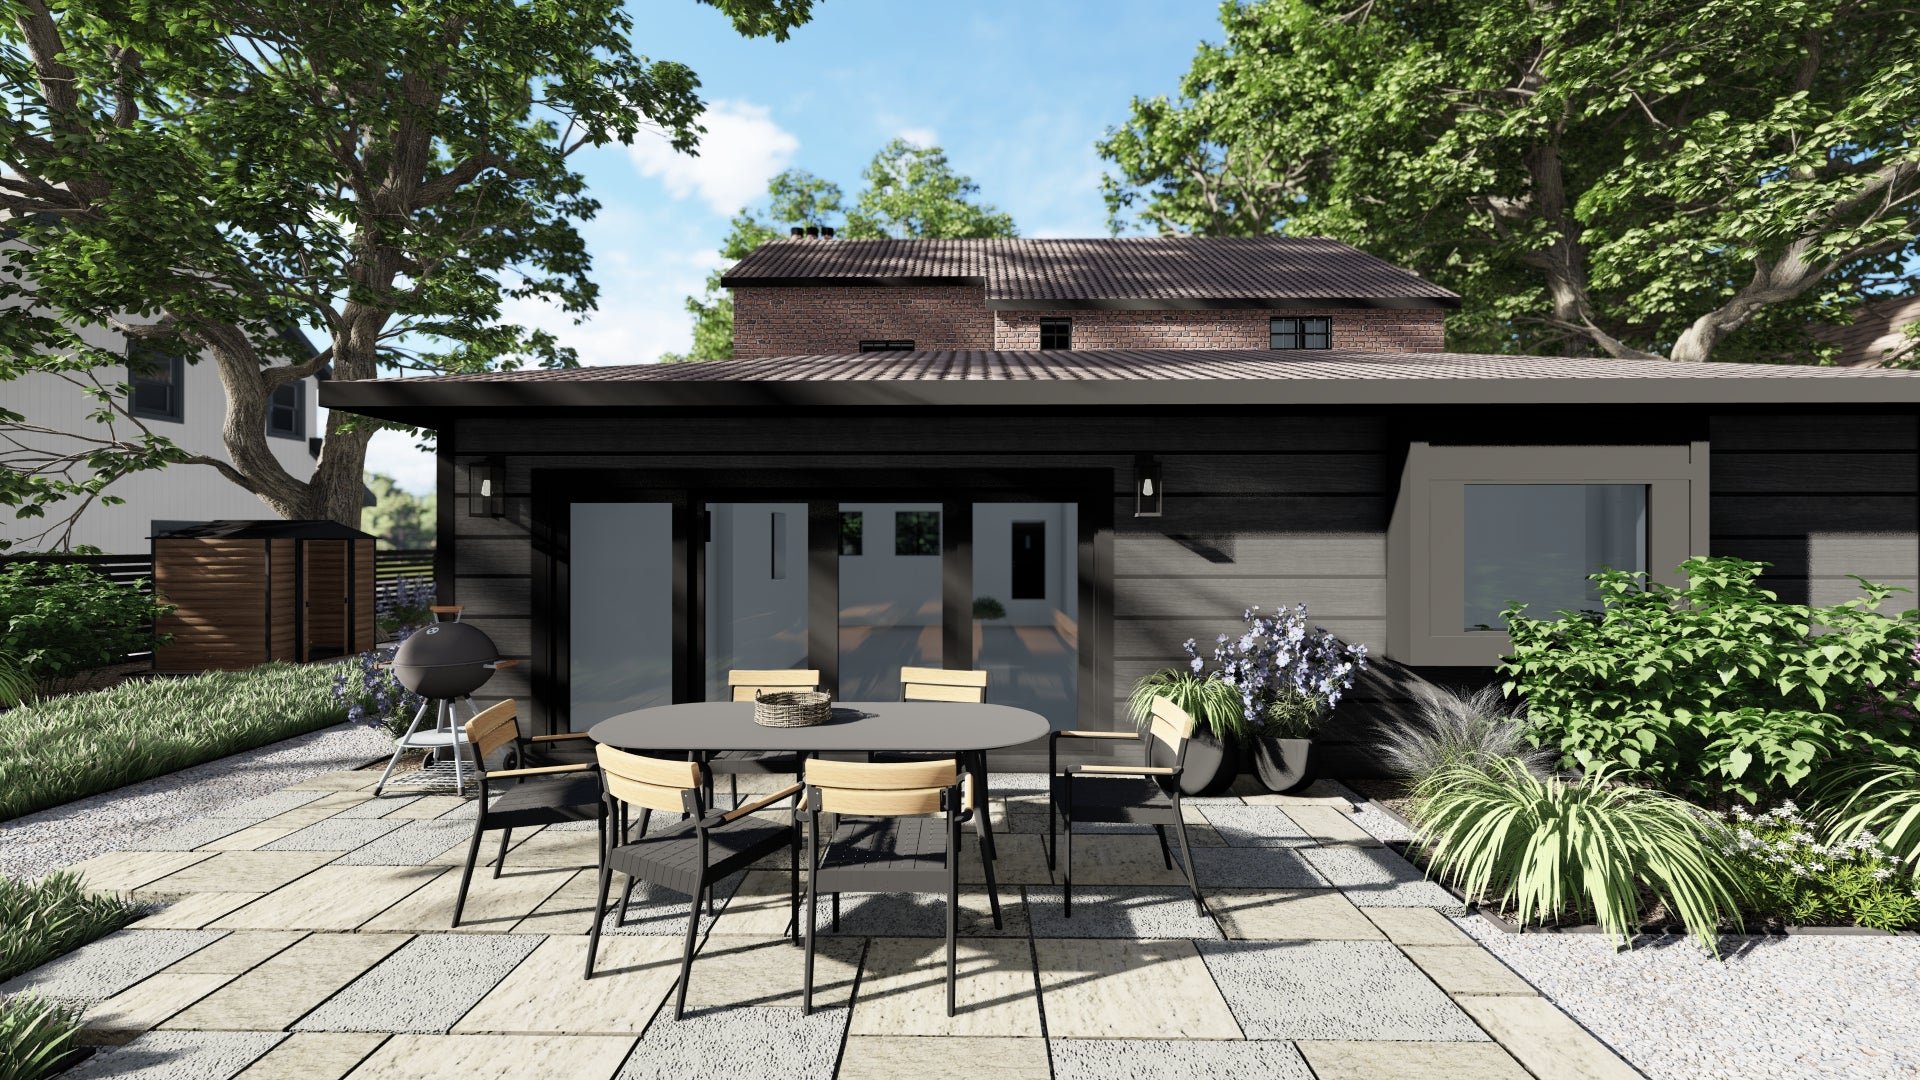 This contemporary backyard landscape design for our client in Minneapolis, MN is given an edge with black patio furniture including the Ballo dining table and a saturated black home exterior.